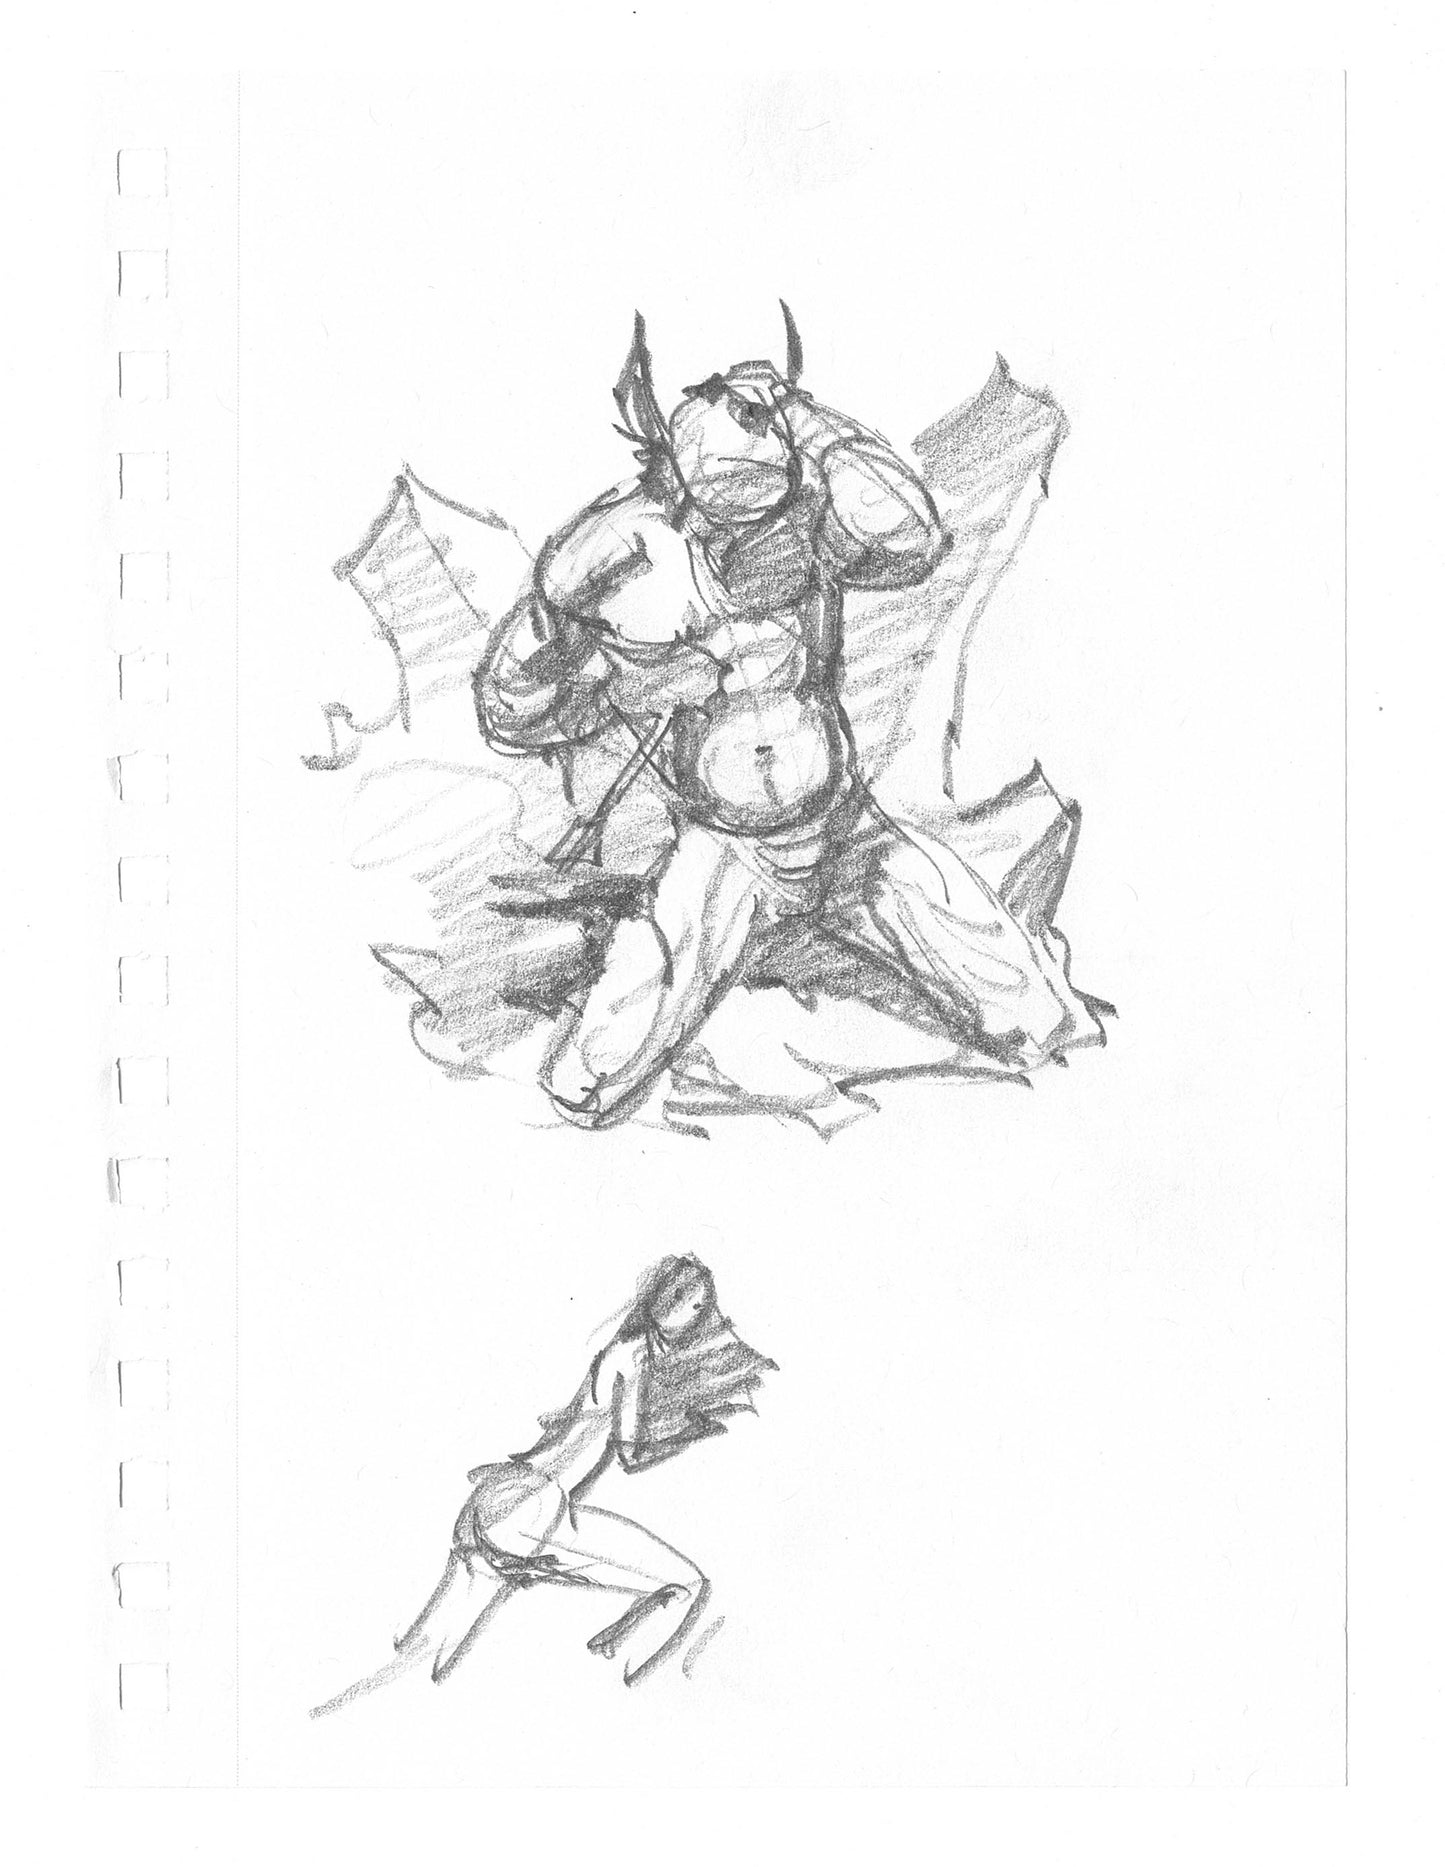 Mike Hoffman Comic Book Artist Personal Original Pencil Art Notebook Page From 2013 A-m66